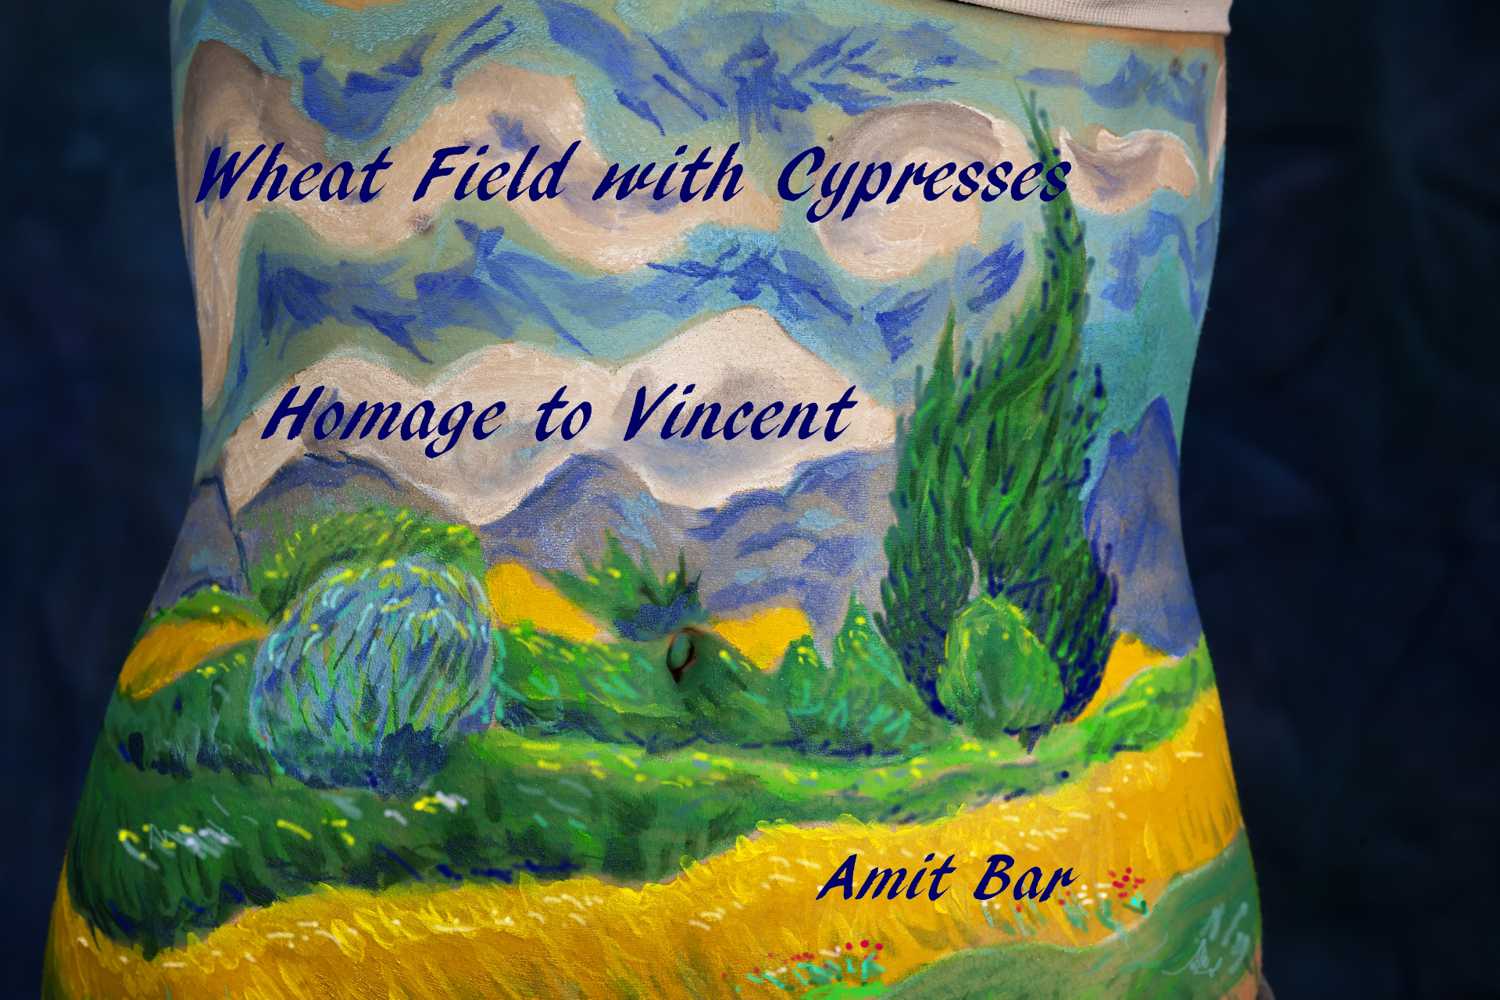 Van Gogh video: The painting of Vincent van Gogh "Wheat Field with Cypresses" gave me the inspiration for creating this body painting